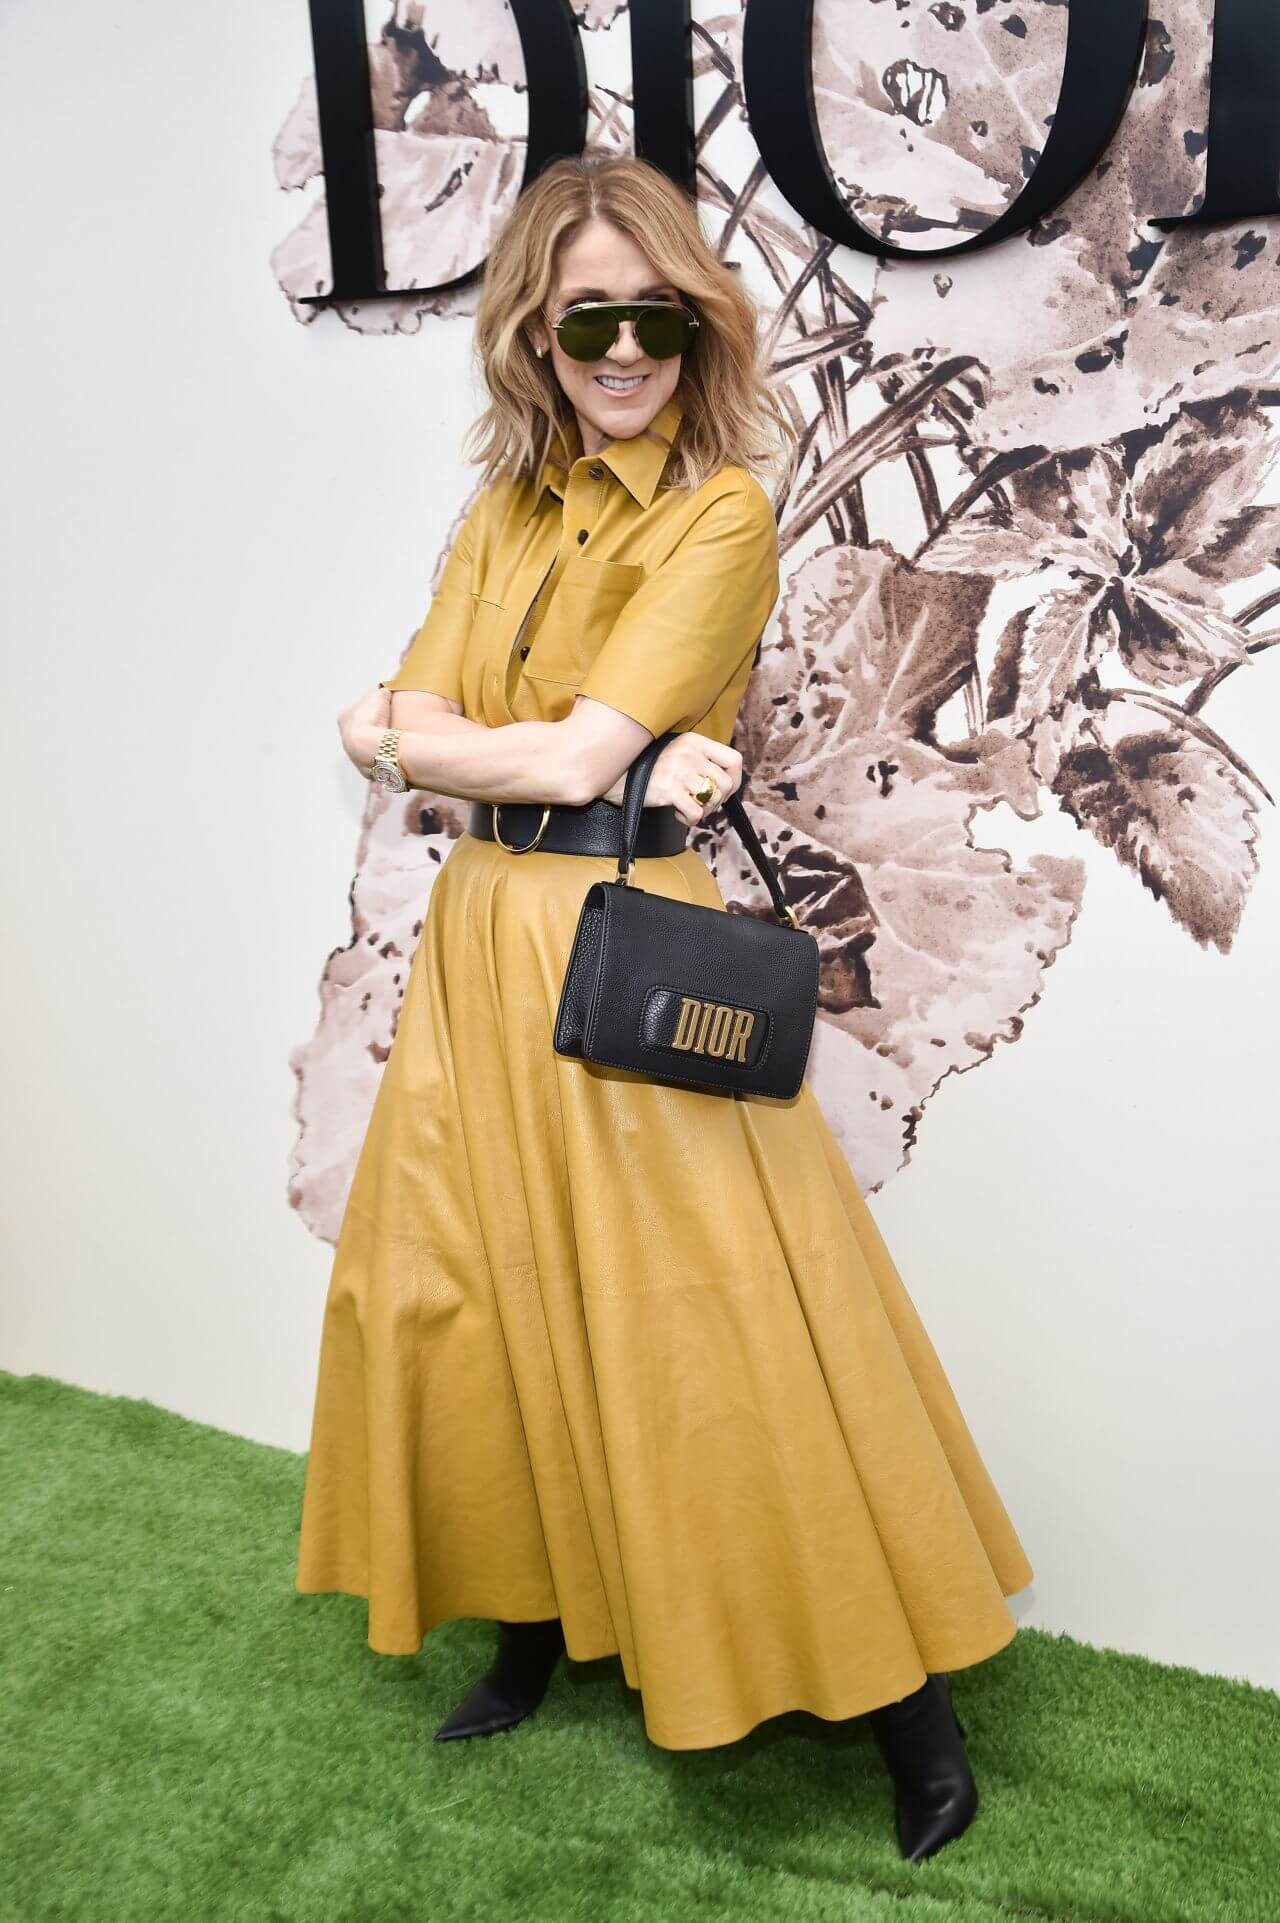 Celine Dion  In Yellow Flare Long Dress With Black Waist Belt At Christian Dior Show in Paris